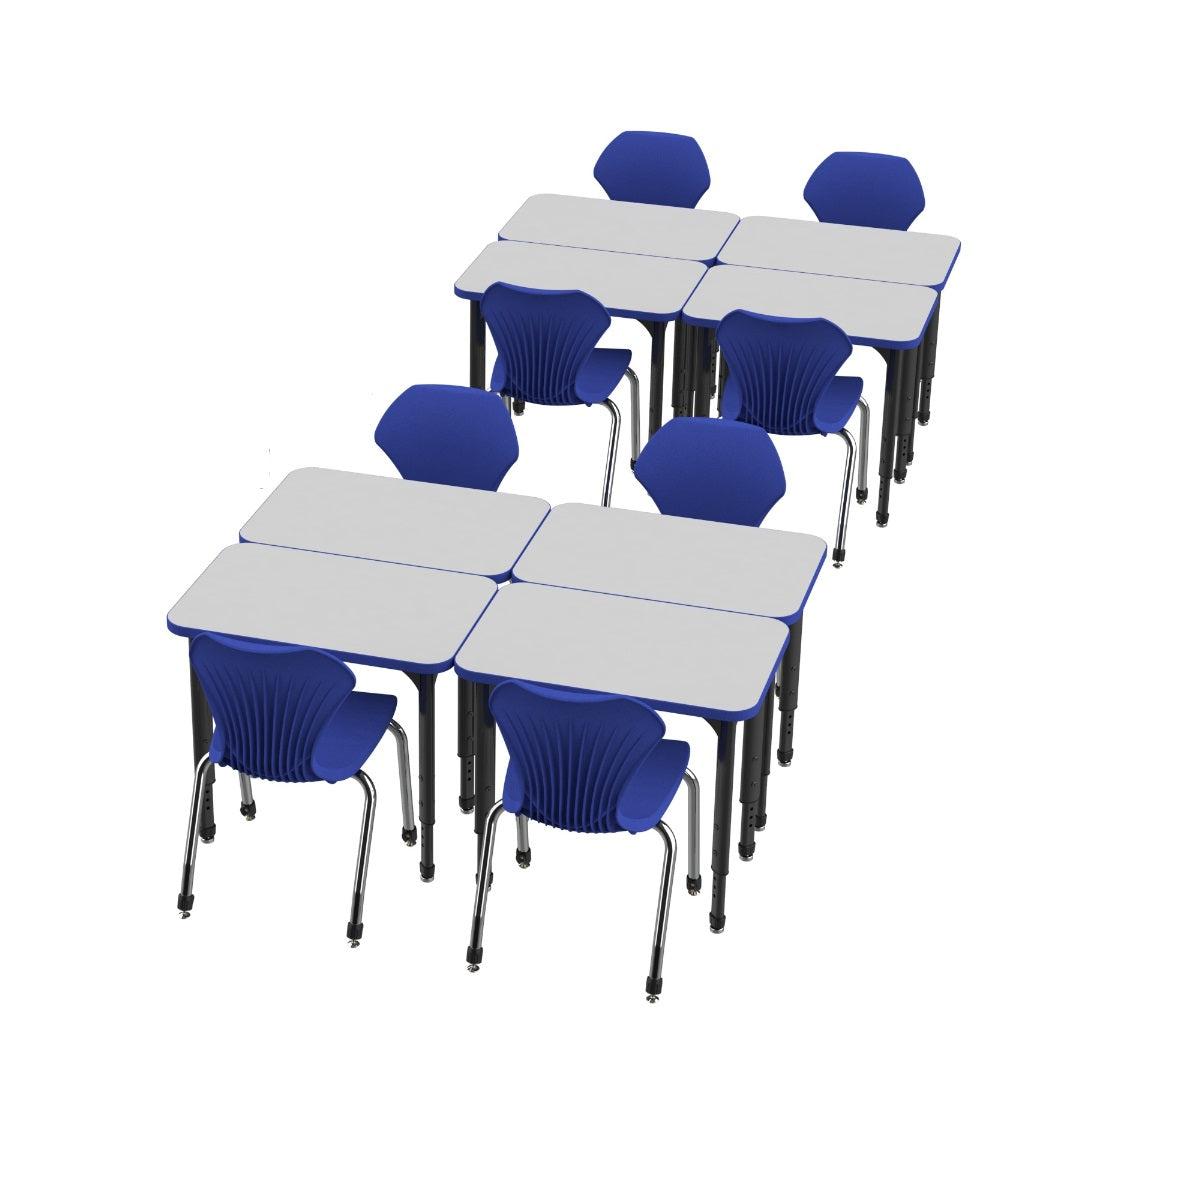 Apex Dry Erase Classroom Desk and Chair Package, 8 Rectangle Collaborative Student Desks, 24" x 30", with 8 Apex Stack Chairs